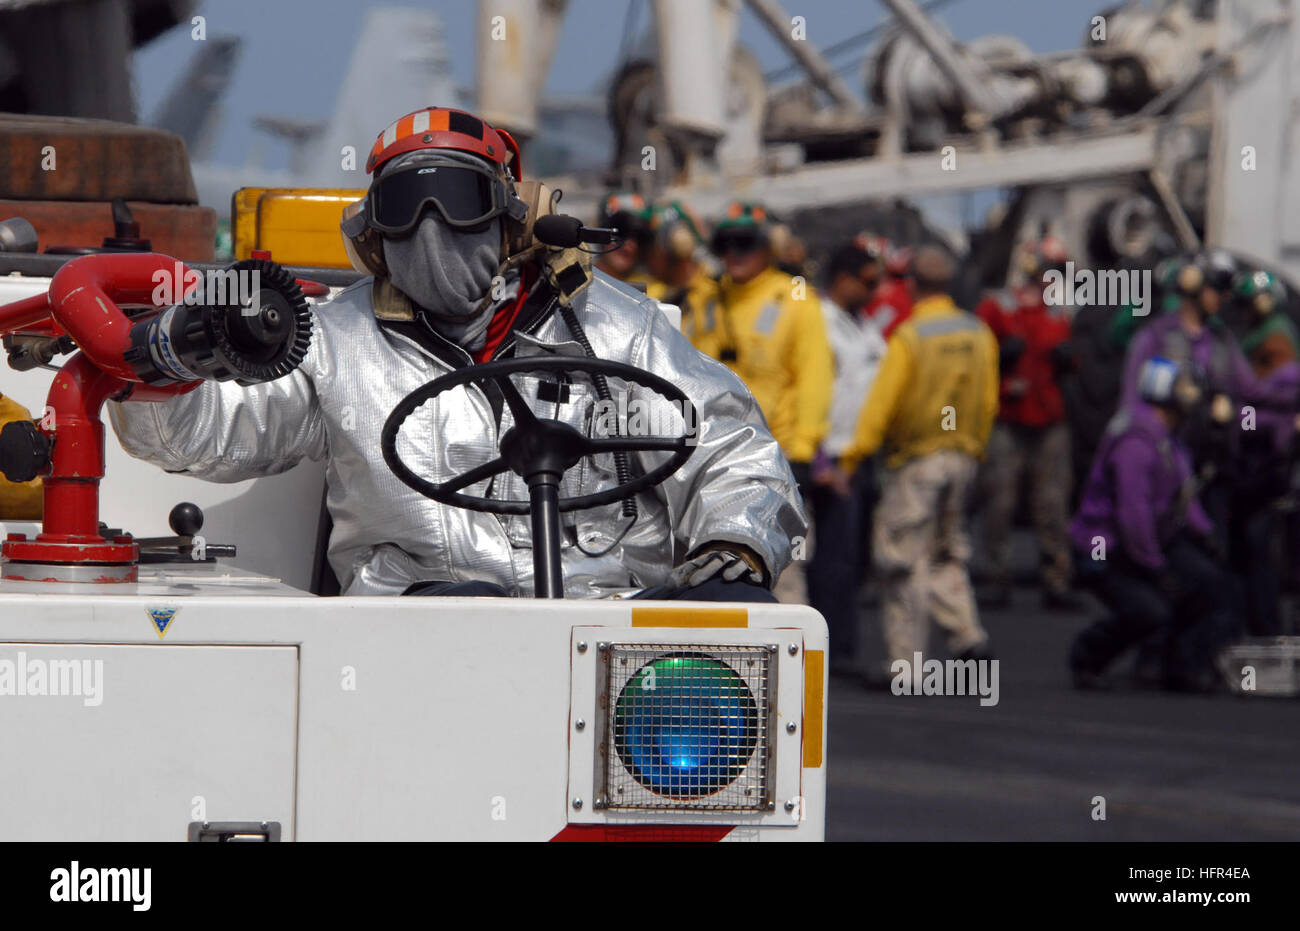 080919-N-4995K-126 GULF OF OMAN (Sept. 19, 2008) A Sailor from the crash and salvage team aboard the Nimitz-class aircraft carrier USS Ronald Reagan (CVN 76) fans the fire hose on the crash cart during flight deck drills. The Crash and salvage team receives specialized training on how to properly handle flight deck and aircraft fires. Ronald Reagan is deployed in the U.S. 5th Fleet area of responsibility. (U.S. Navy photo by Mass Communication Specialist 3rd Class Chelsea Kennedy/Released) US Navy 080919-N-4995K-126 A Sailor from the crash and salvage team aboard the Nimitz-class aircraft carr Stock Photo